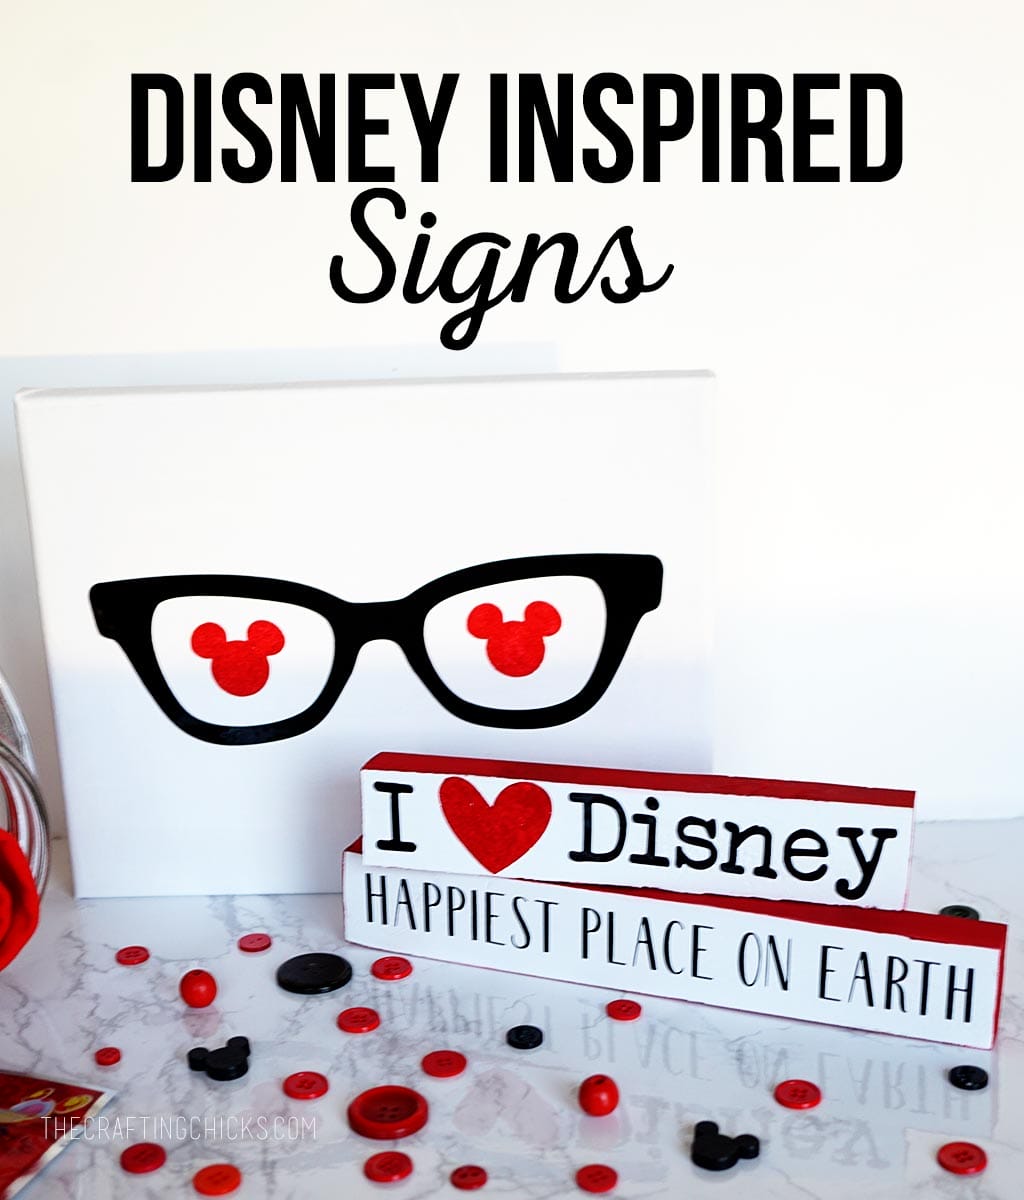 Disney Inspired Signs | These Disney Signs are an inexpensive and cute gift idea for those people on your Christmas list.